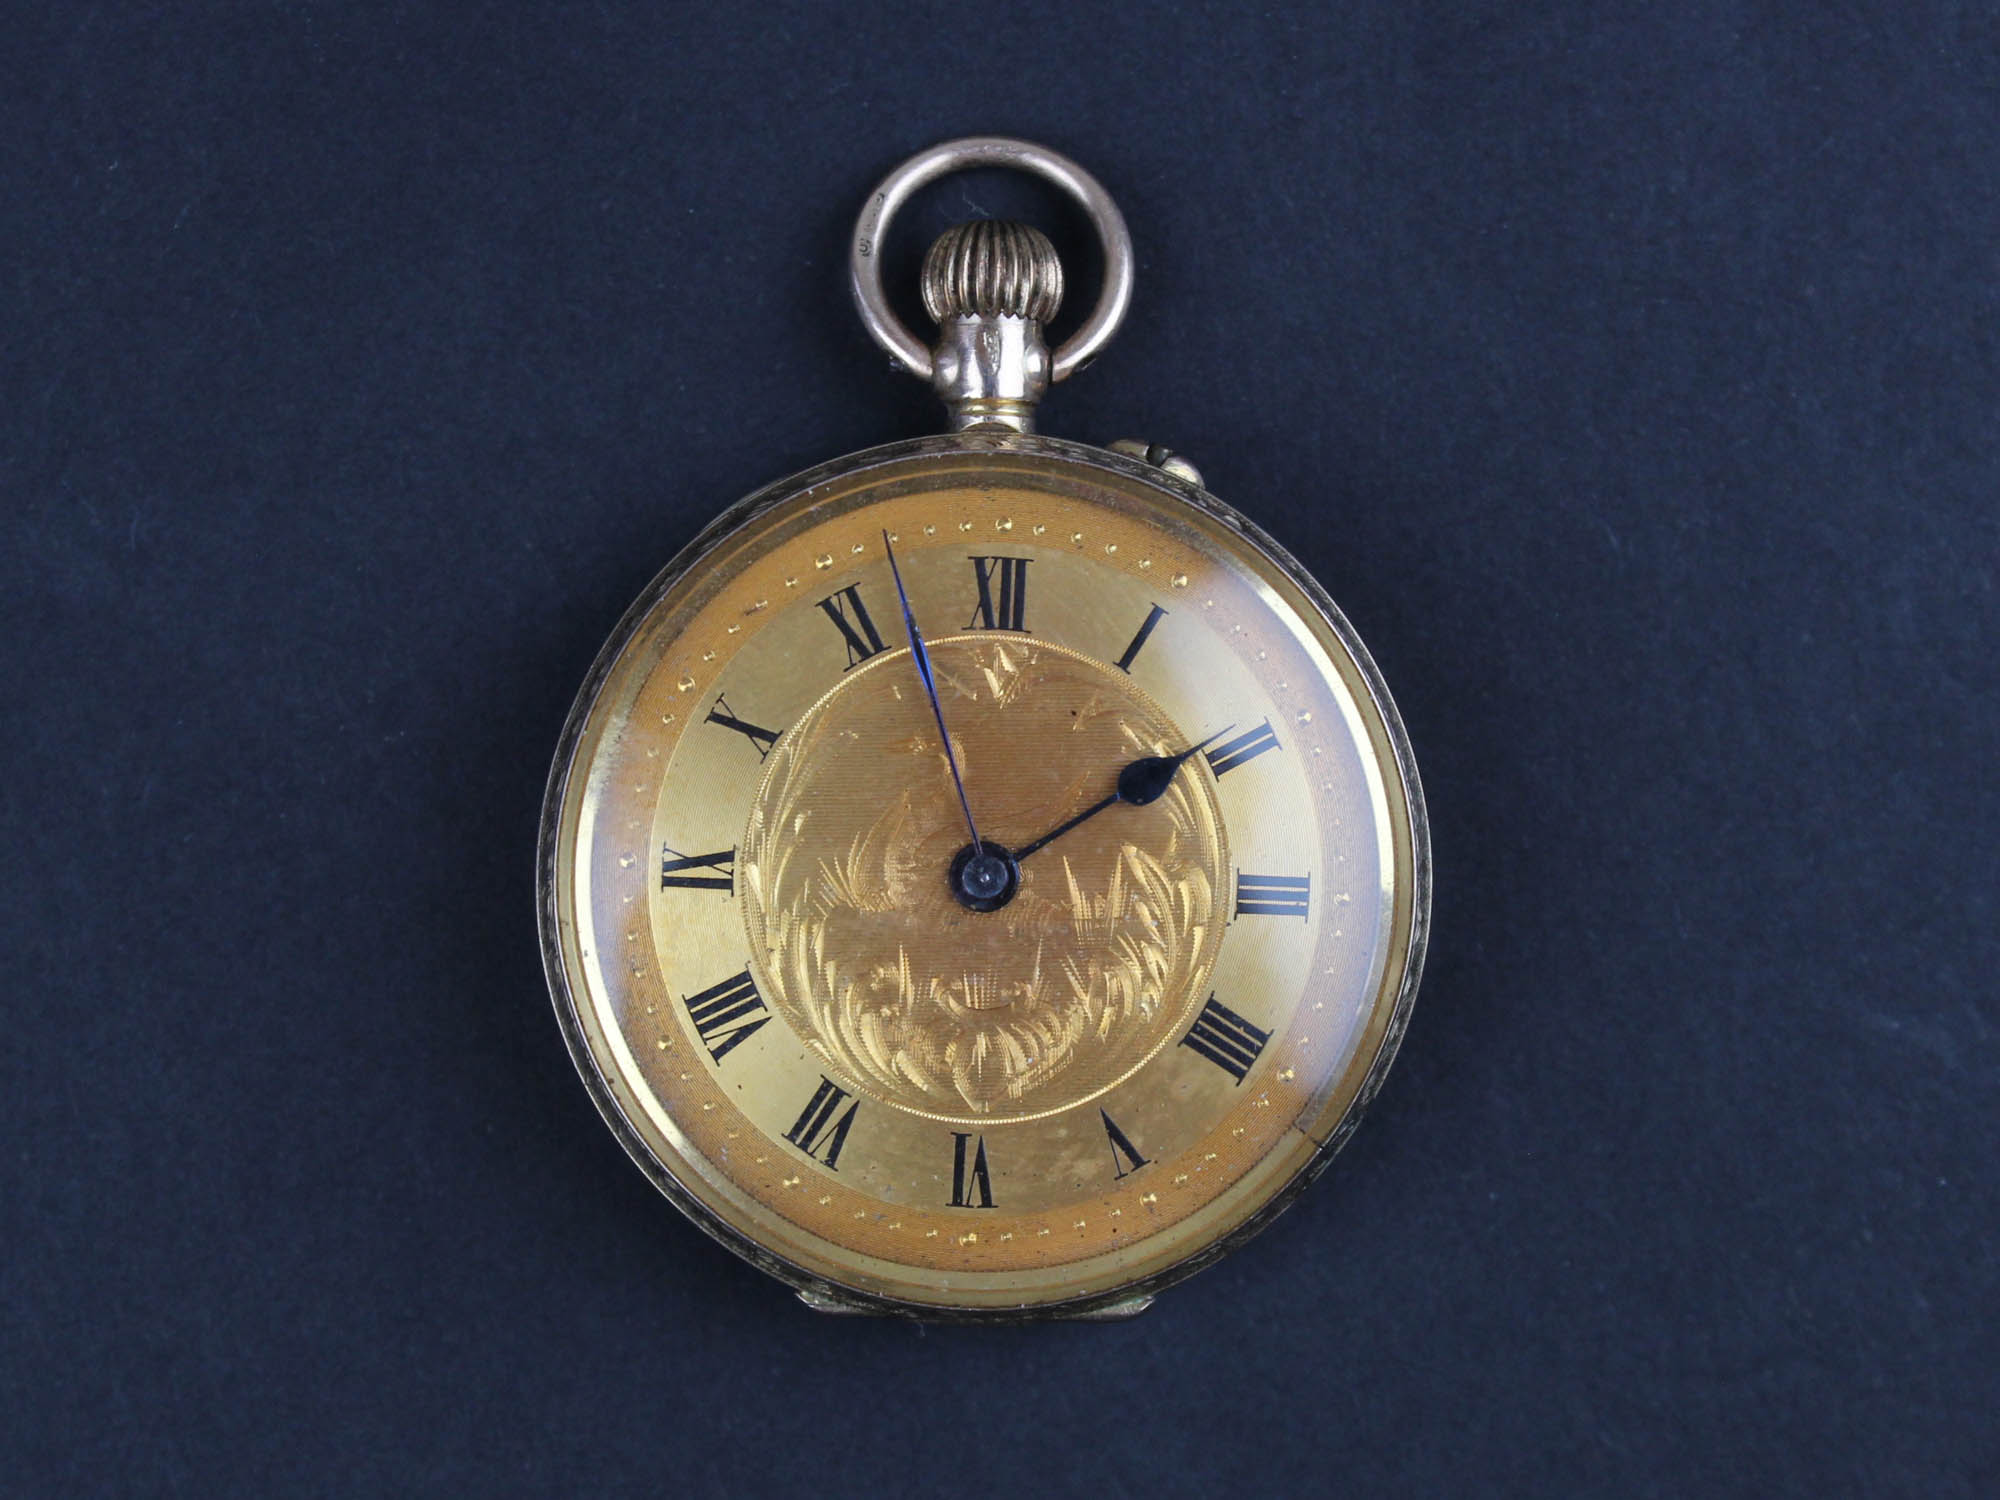 Ladies 9ct gold pocket watch, gilt dial with roman numerals surrounded by minute track, the dial